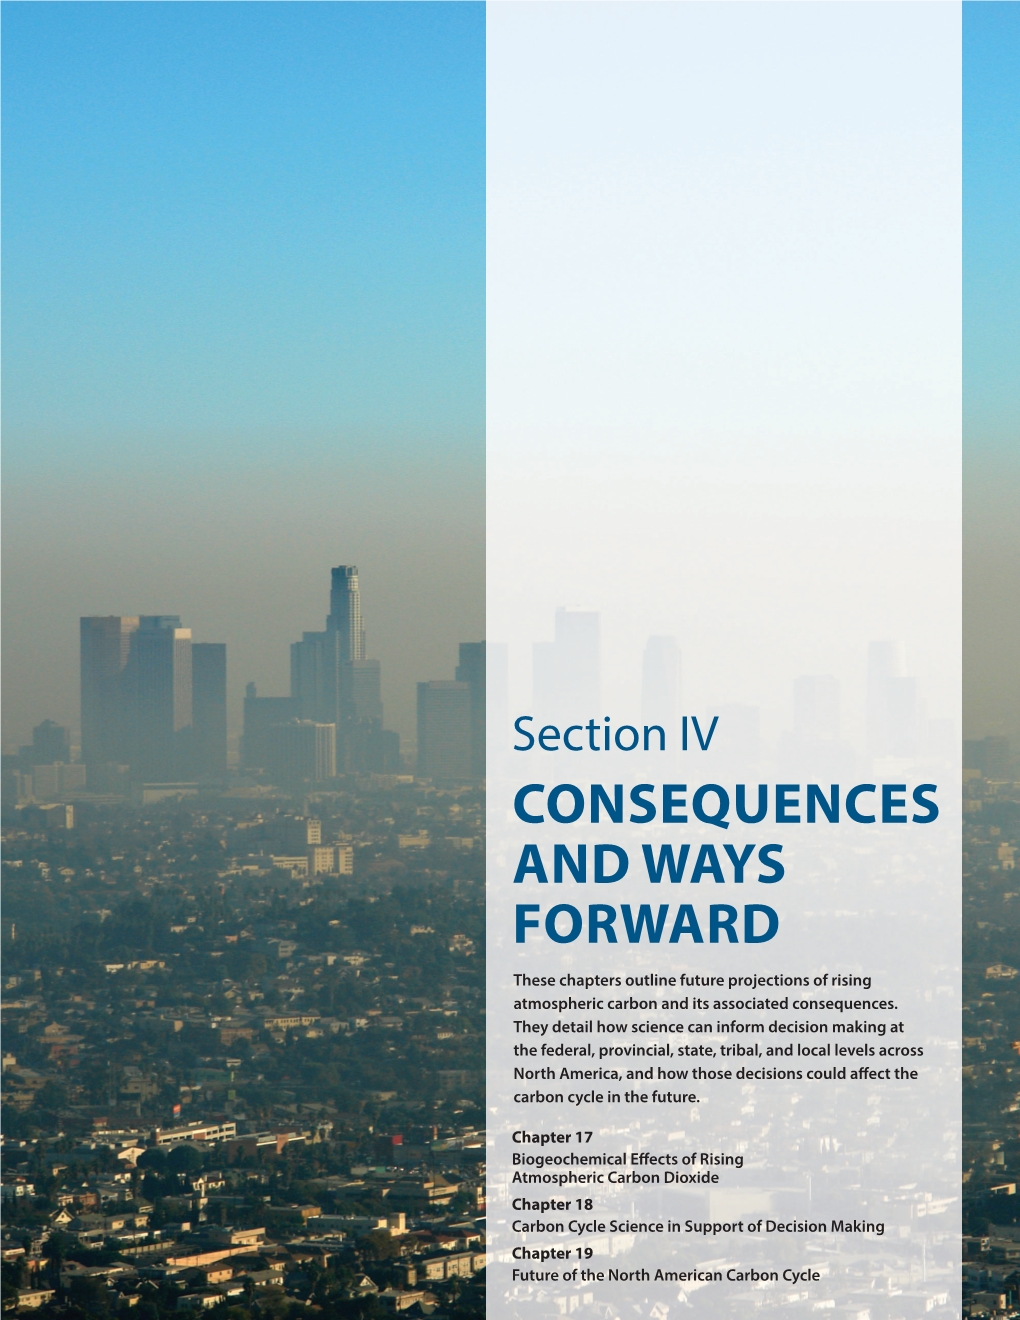 CONSEQUENCES and WAYS FORWARD These Chapters Outline Future Projections of Rising Atmospheric Carbon and Its Associated Consequences